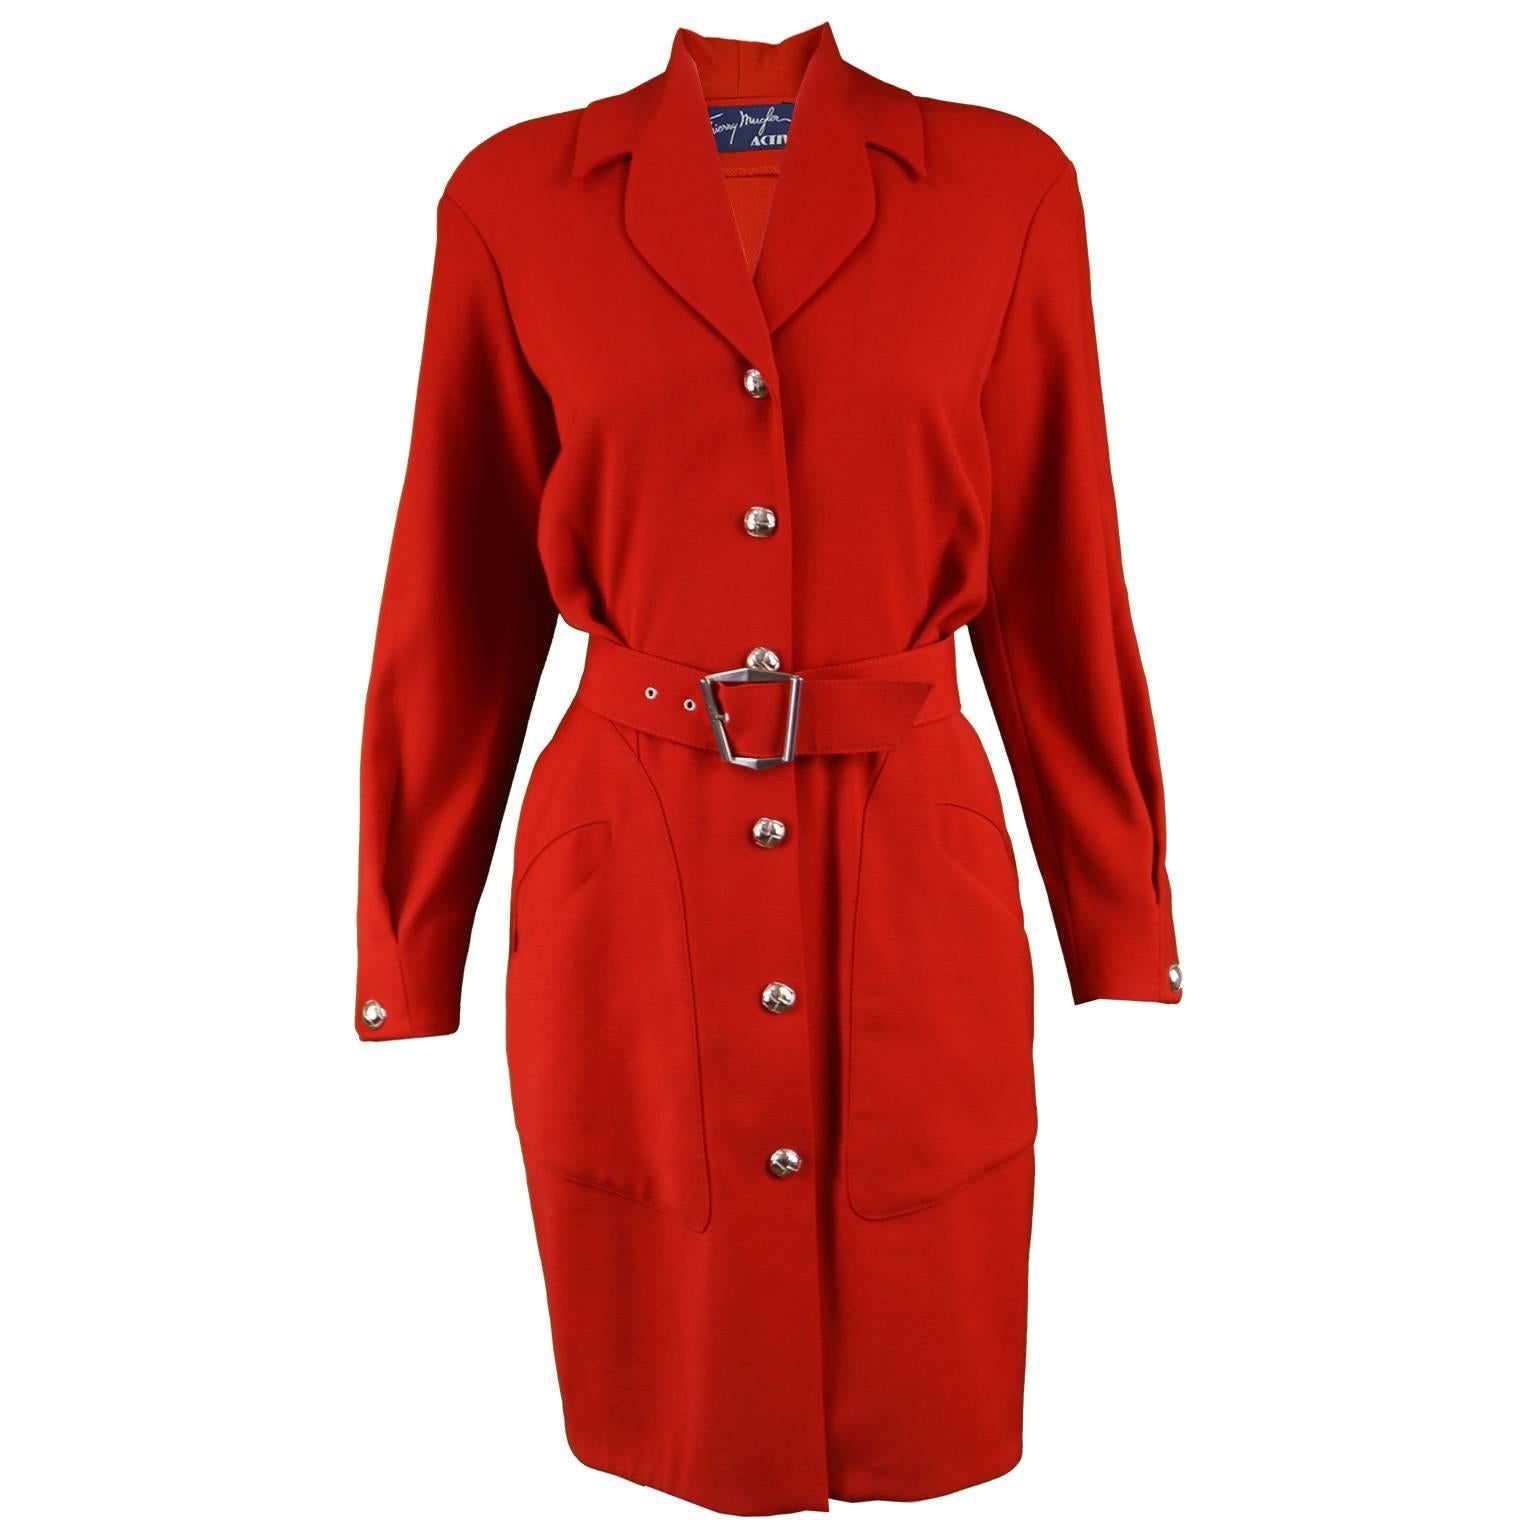 Thierry Mugler Vintage 1980s Red Wool Long Sleeve Blouson Fit Shirt Dress For Sale